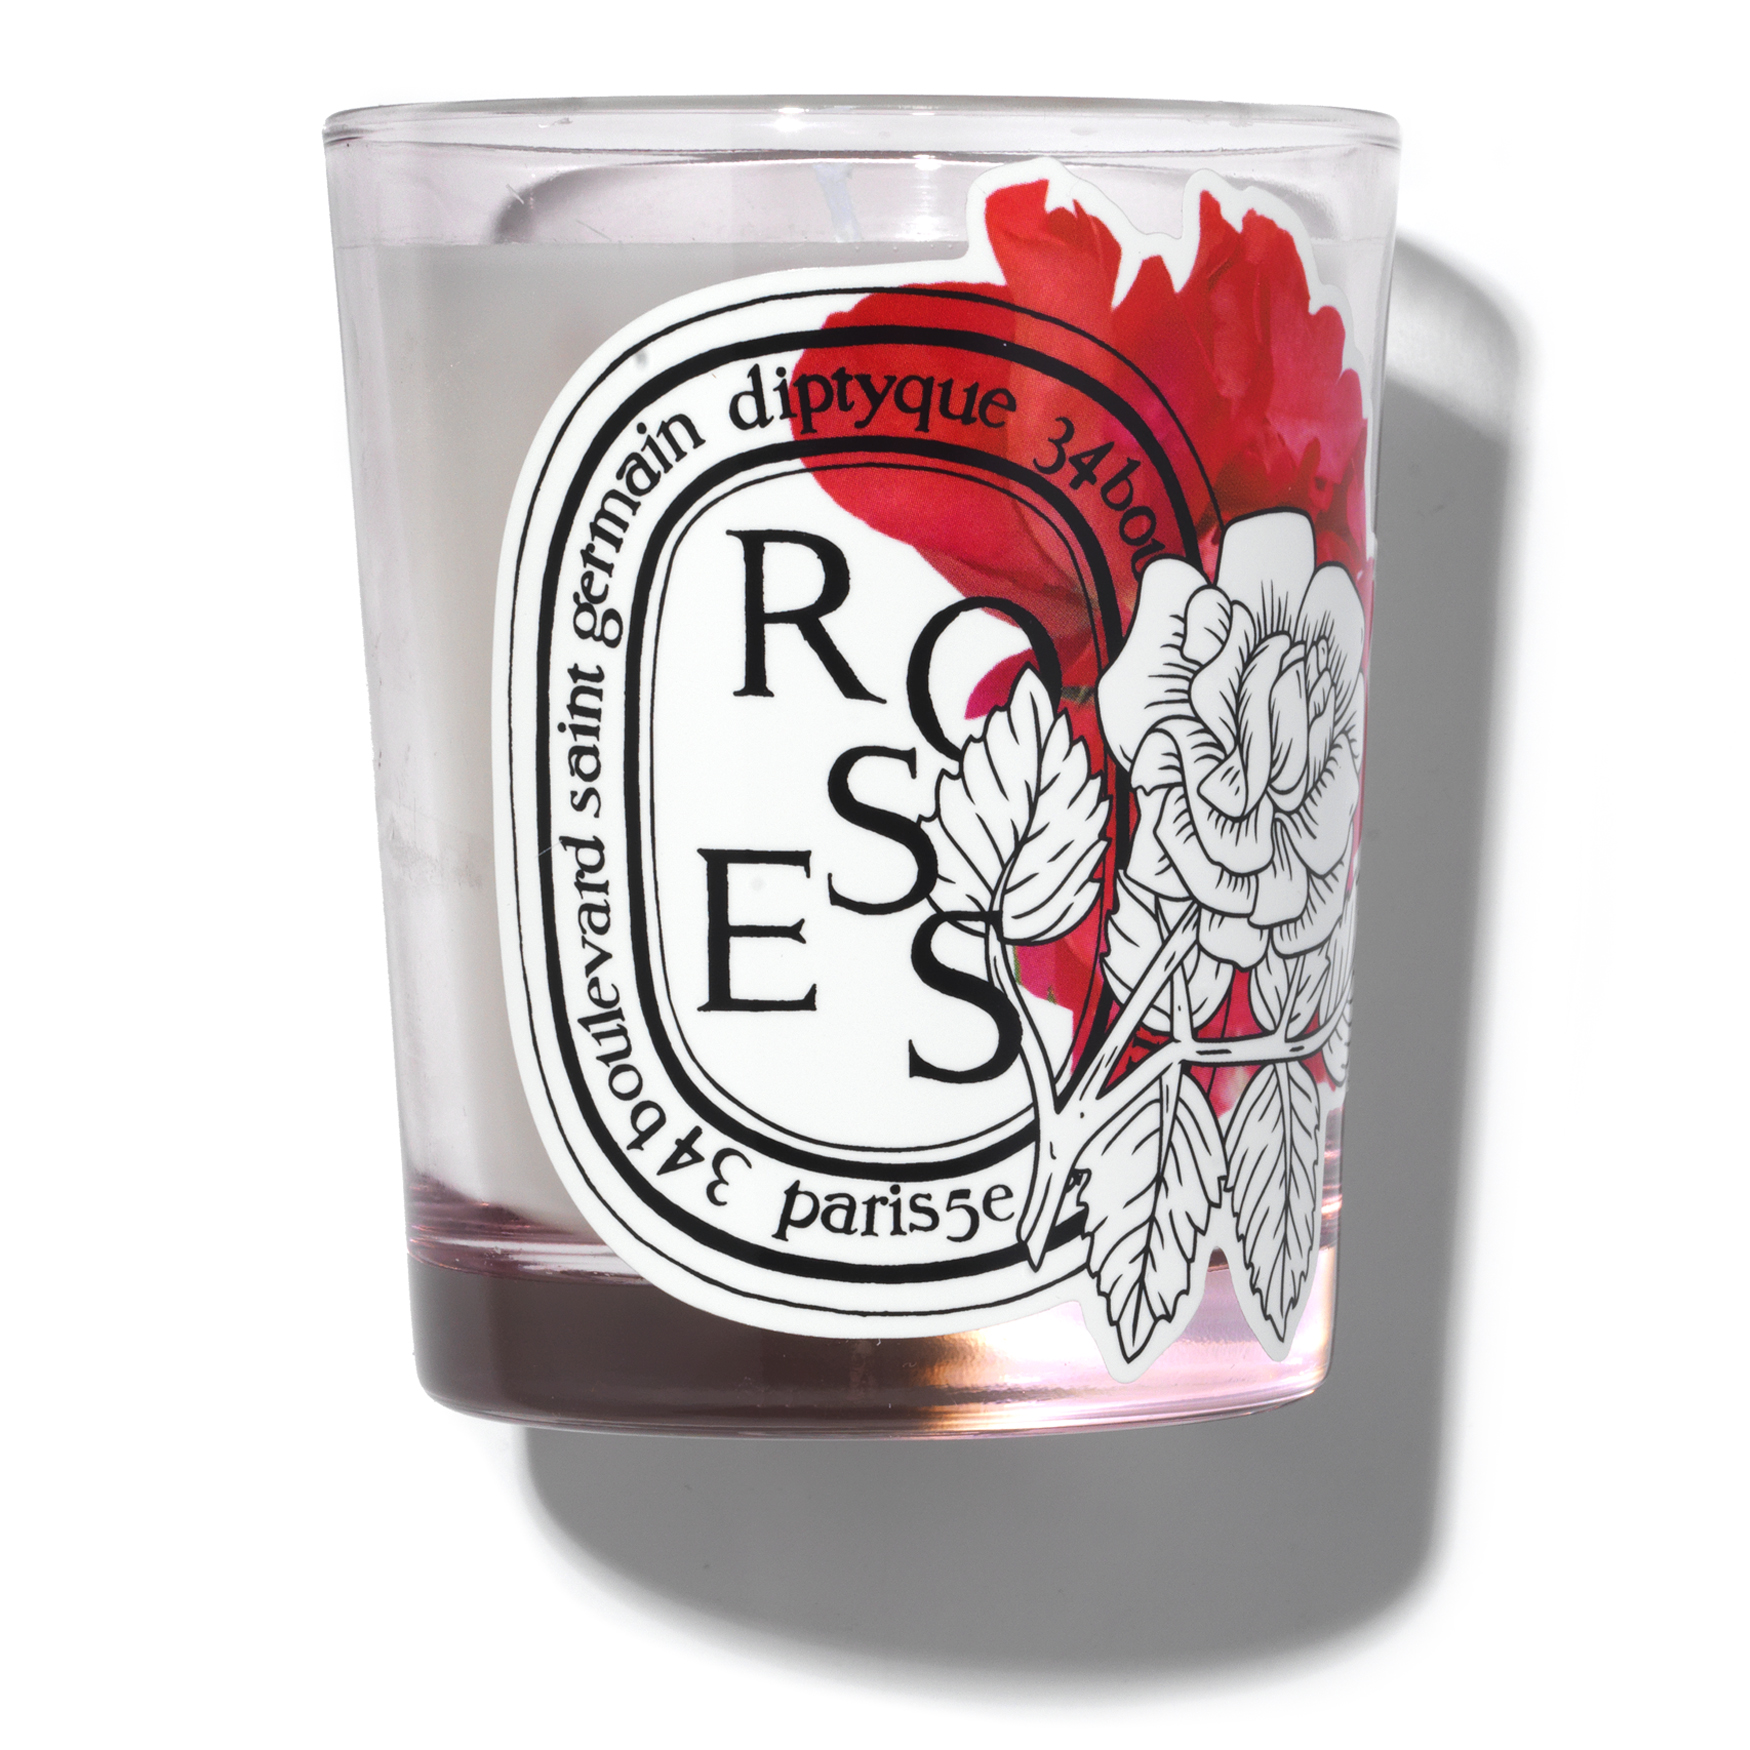 diptyque DIPTYQUE Roses Scented Candle 35g NEW In Box Eau Rose Limited Edition BN 